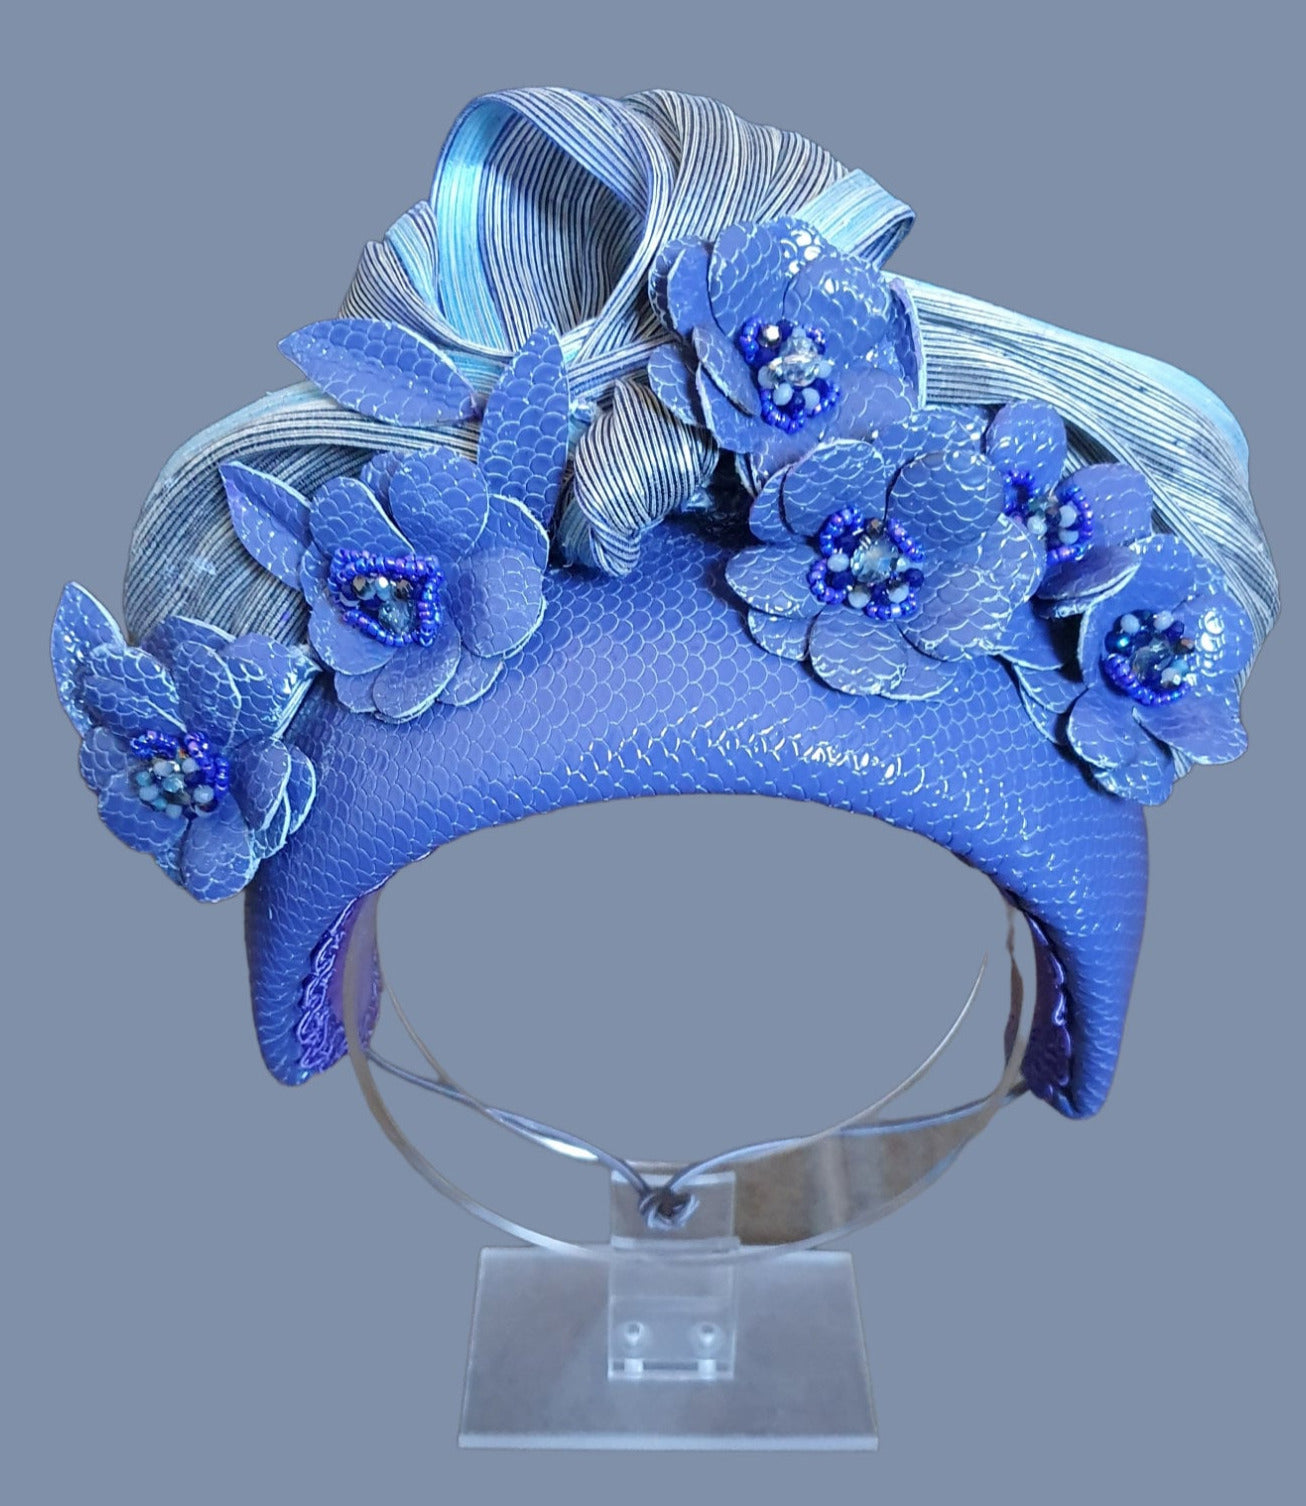 Handmade purple and blue headband from natural leather with flowers and silk abaca - beautiful headband, festive unique diadem